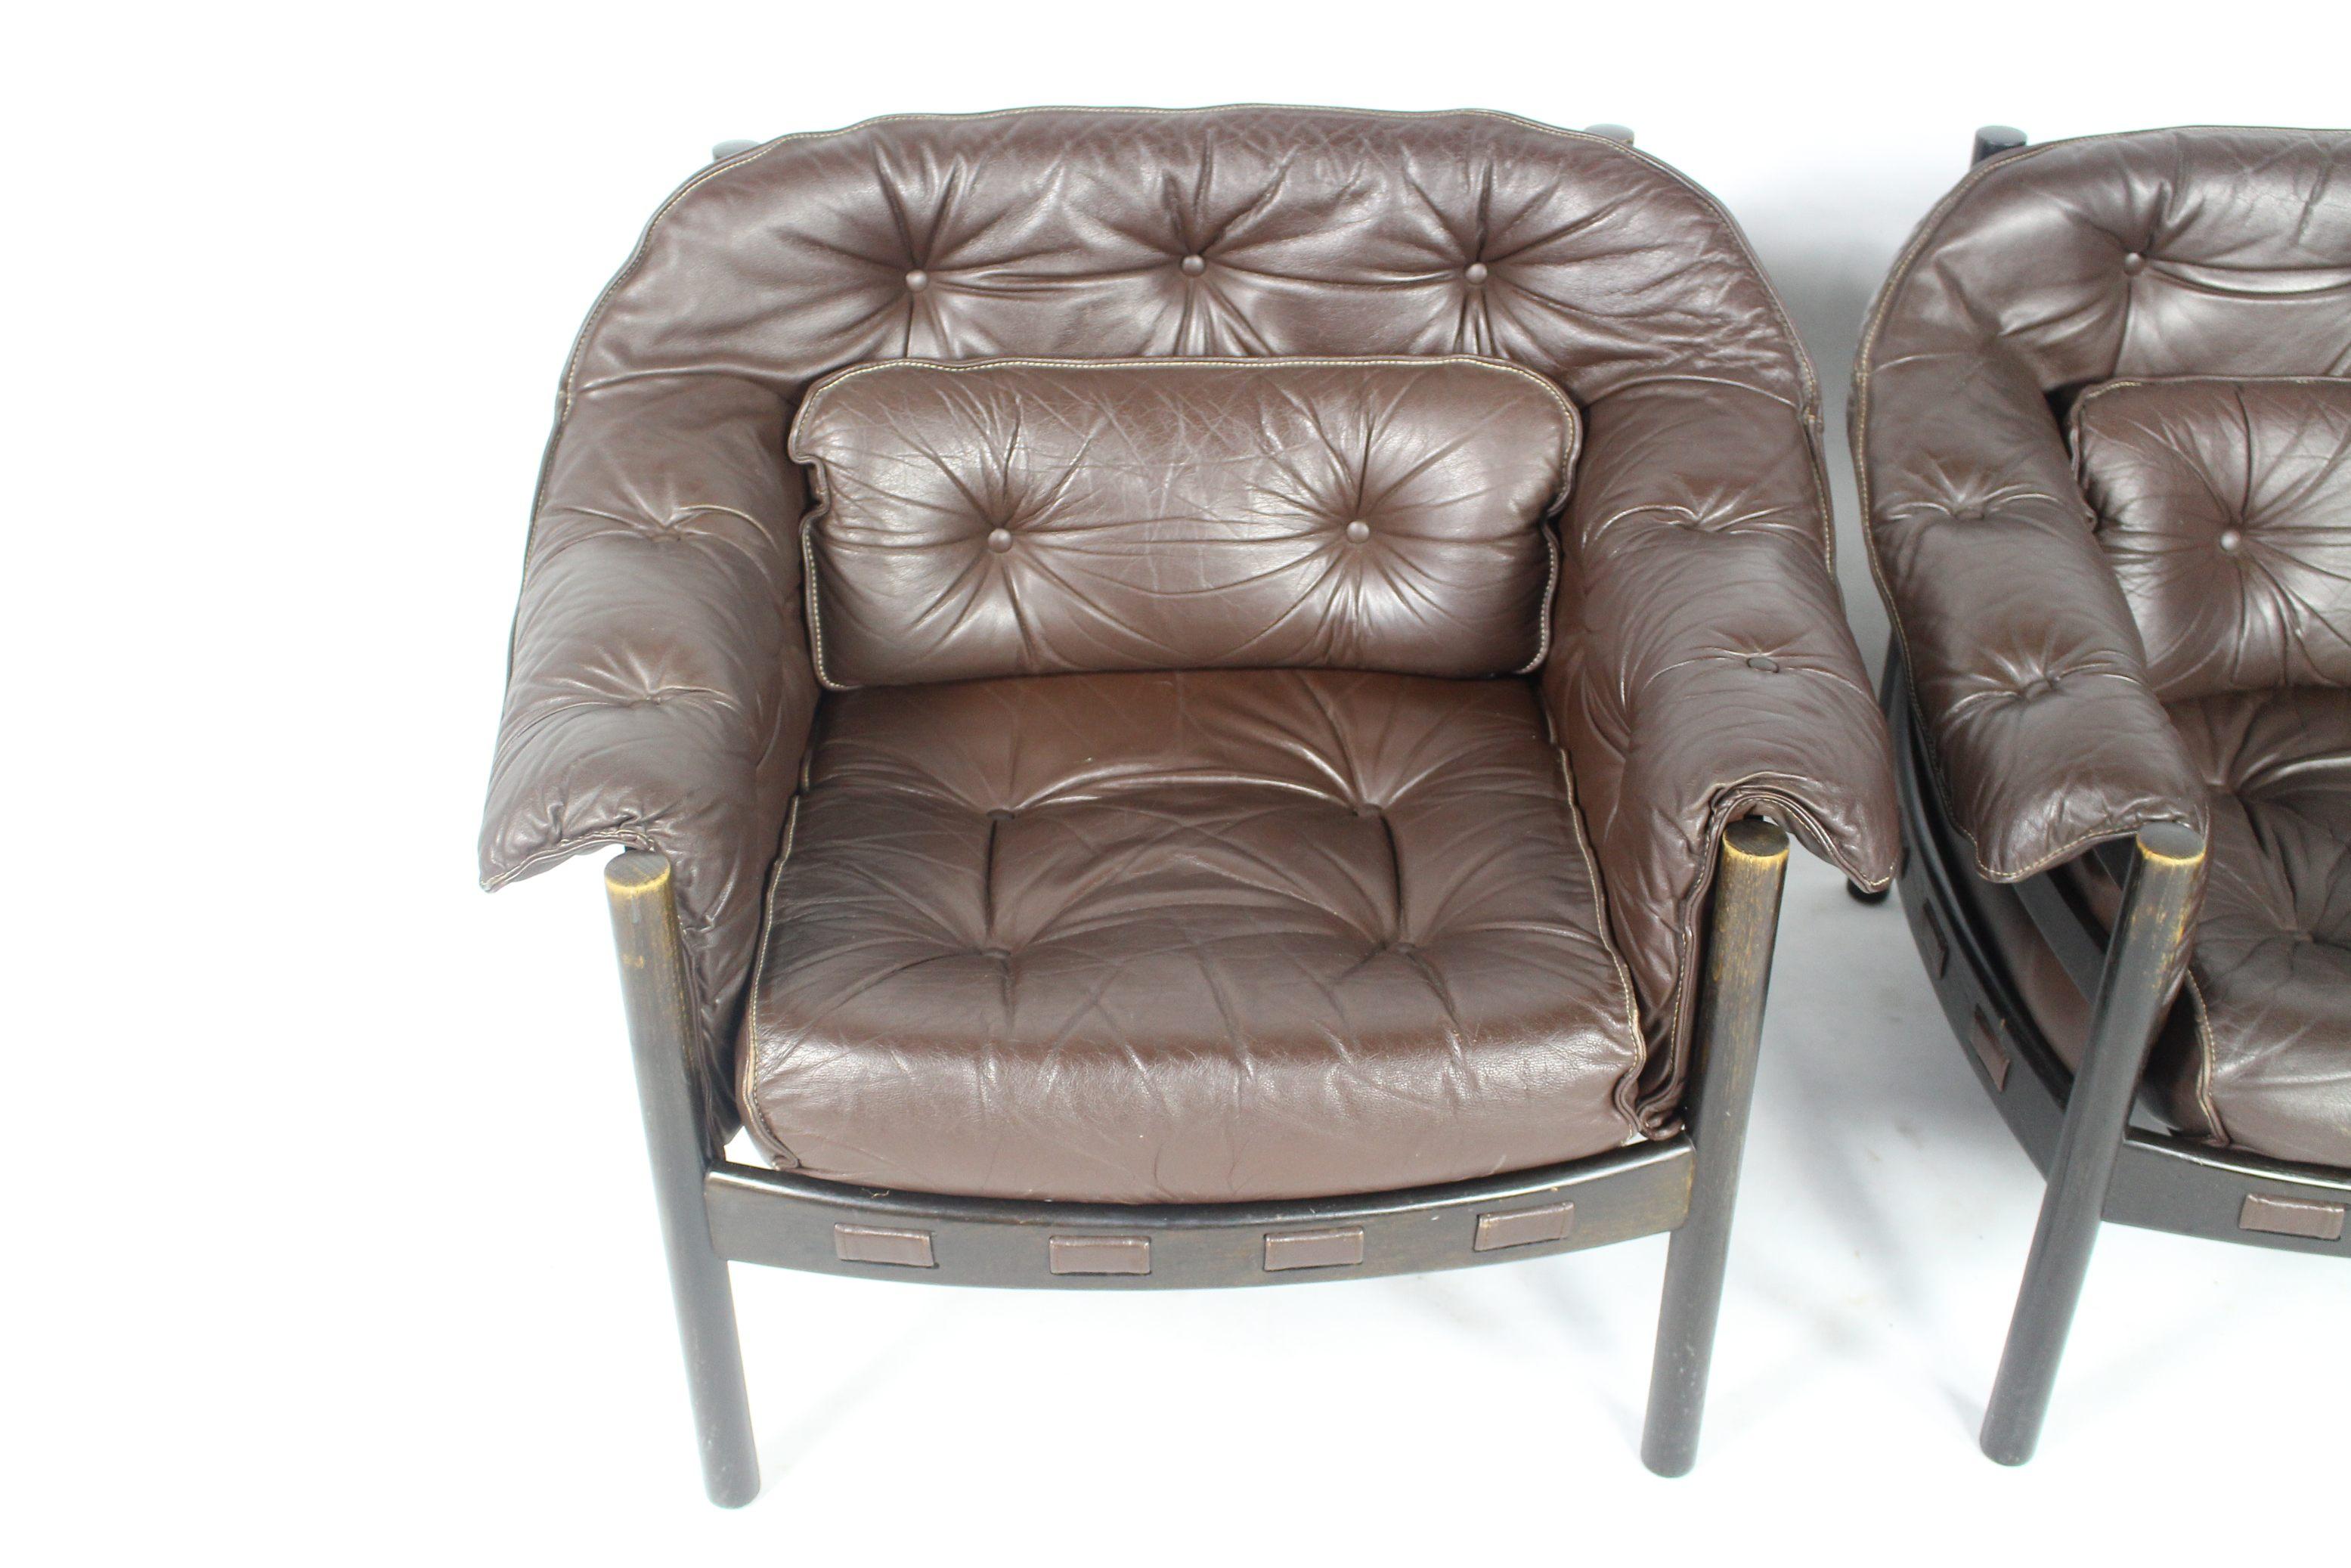 Set of 2 Coja armchairs by the Swedish designer Sven Ellekaer.
The chocolate brown leather is in very good condition.
Soft seating comfort from the 1960s.
Price for pair.